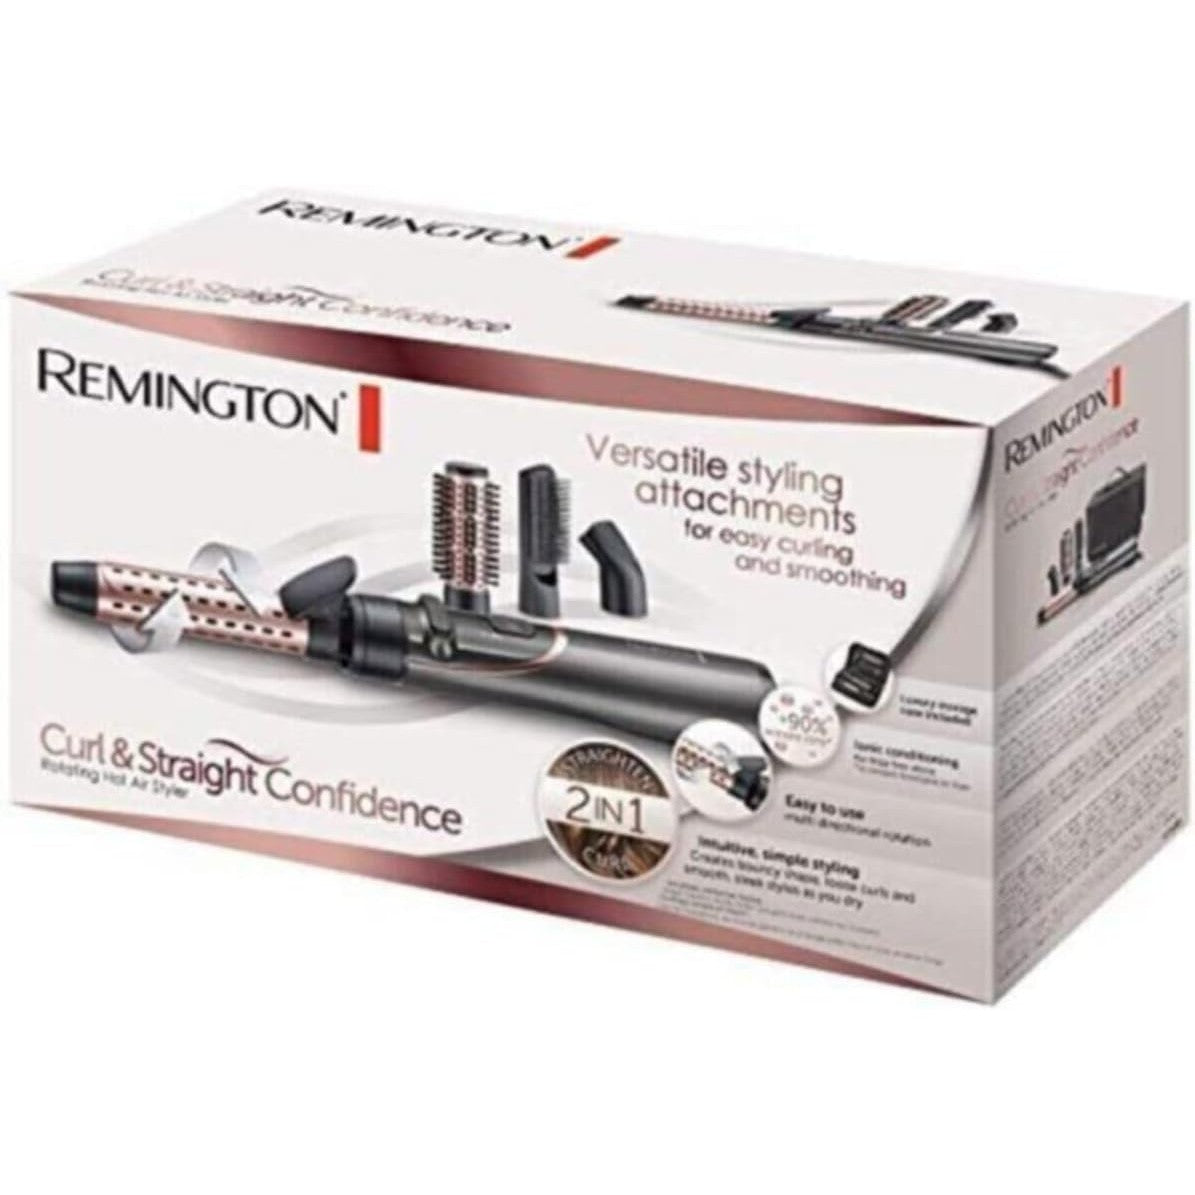 Remington Curl & Straight Confidence Rotating Hot Air Styler Hot Brush with 4 attachments - create curls, waves & straight styles, 30mm Tong, 40mm Round Brush, Paddle Brush & Pre-Styling nozzle AS8606